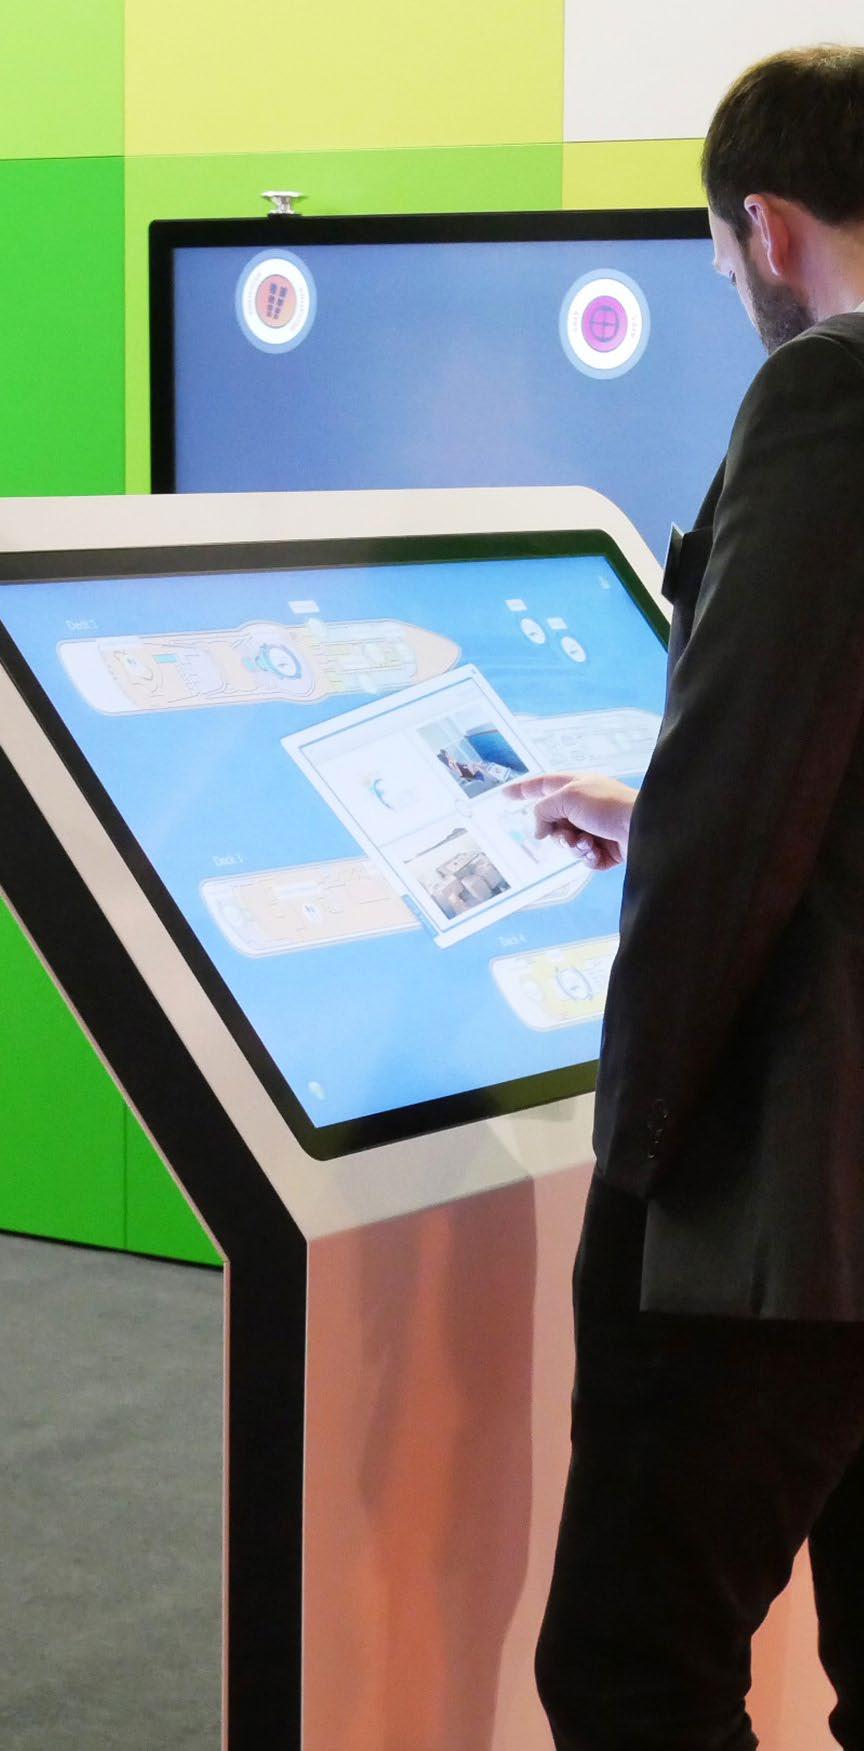 LCD MULTITOUCH SYSTEMS (PCAP / IR) MULTIUSER TOUCH SCREEN SOFTWARE ADVANCED OBJECT RECOGNITION YOUR INDIVIDUAL SYSTEM Choose from various designs, sizes &